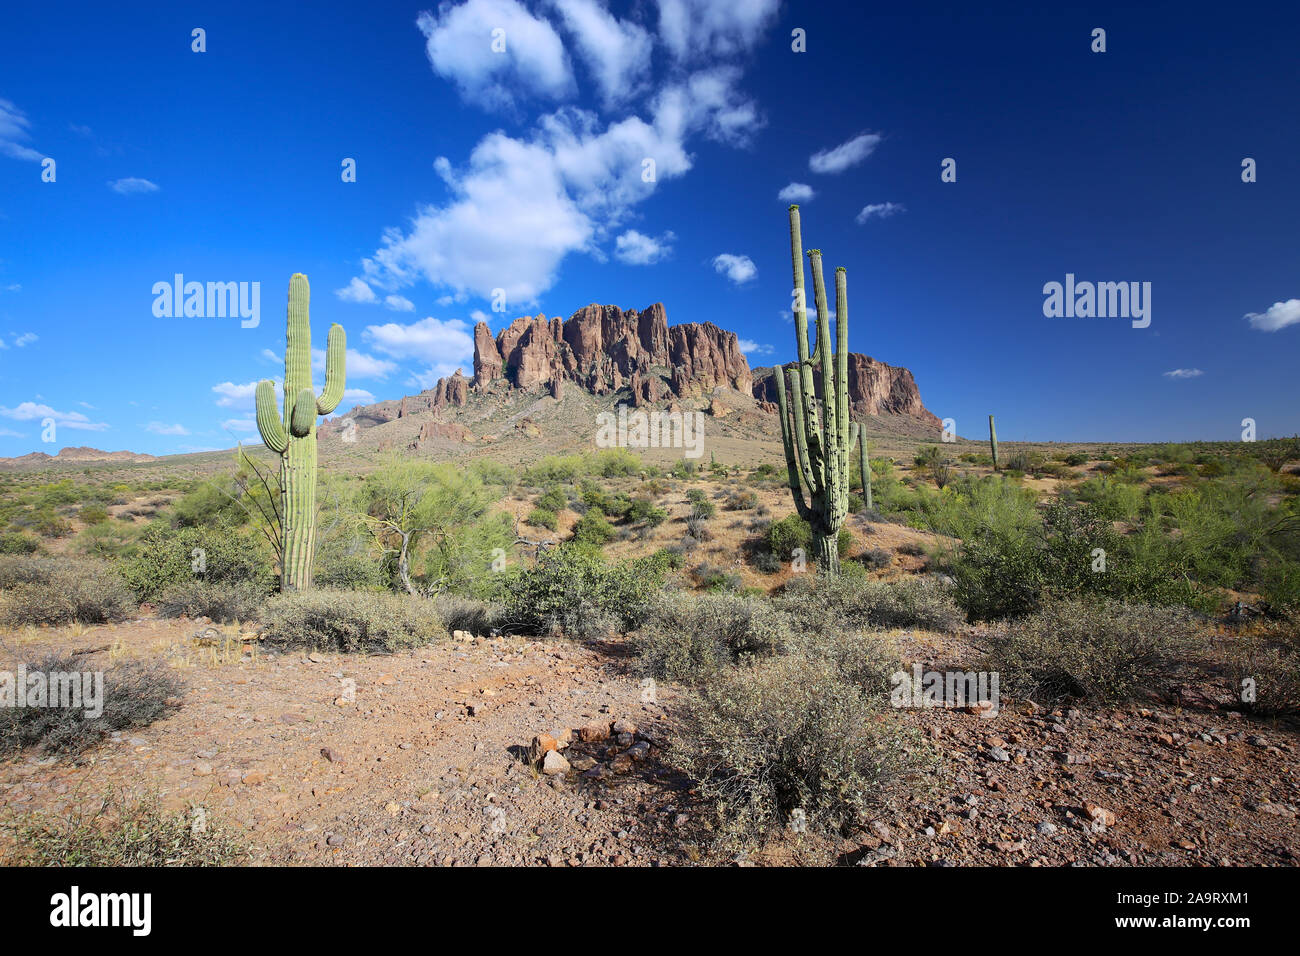 Superstition Mountains and cactus desert landscape in Lost Dutchman State Park, Arizona Stock Photo